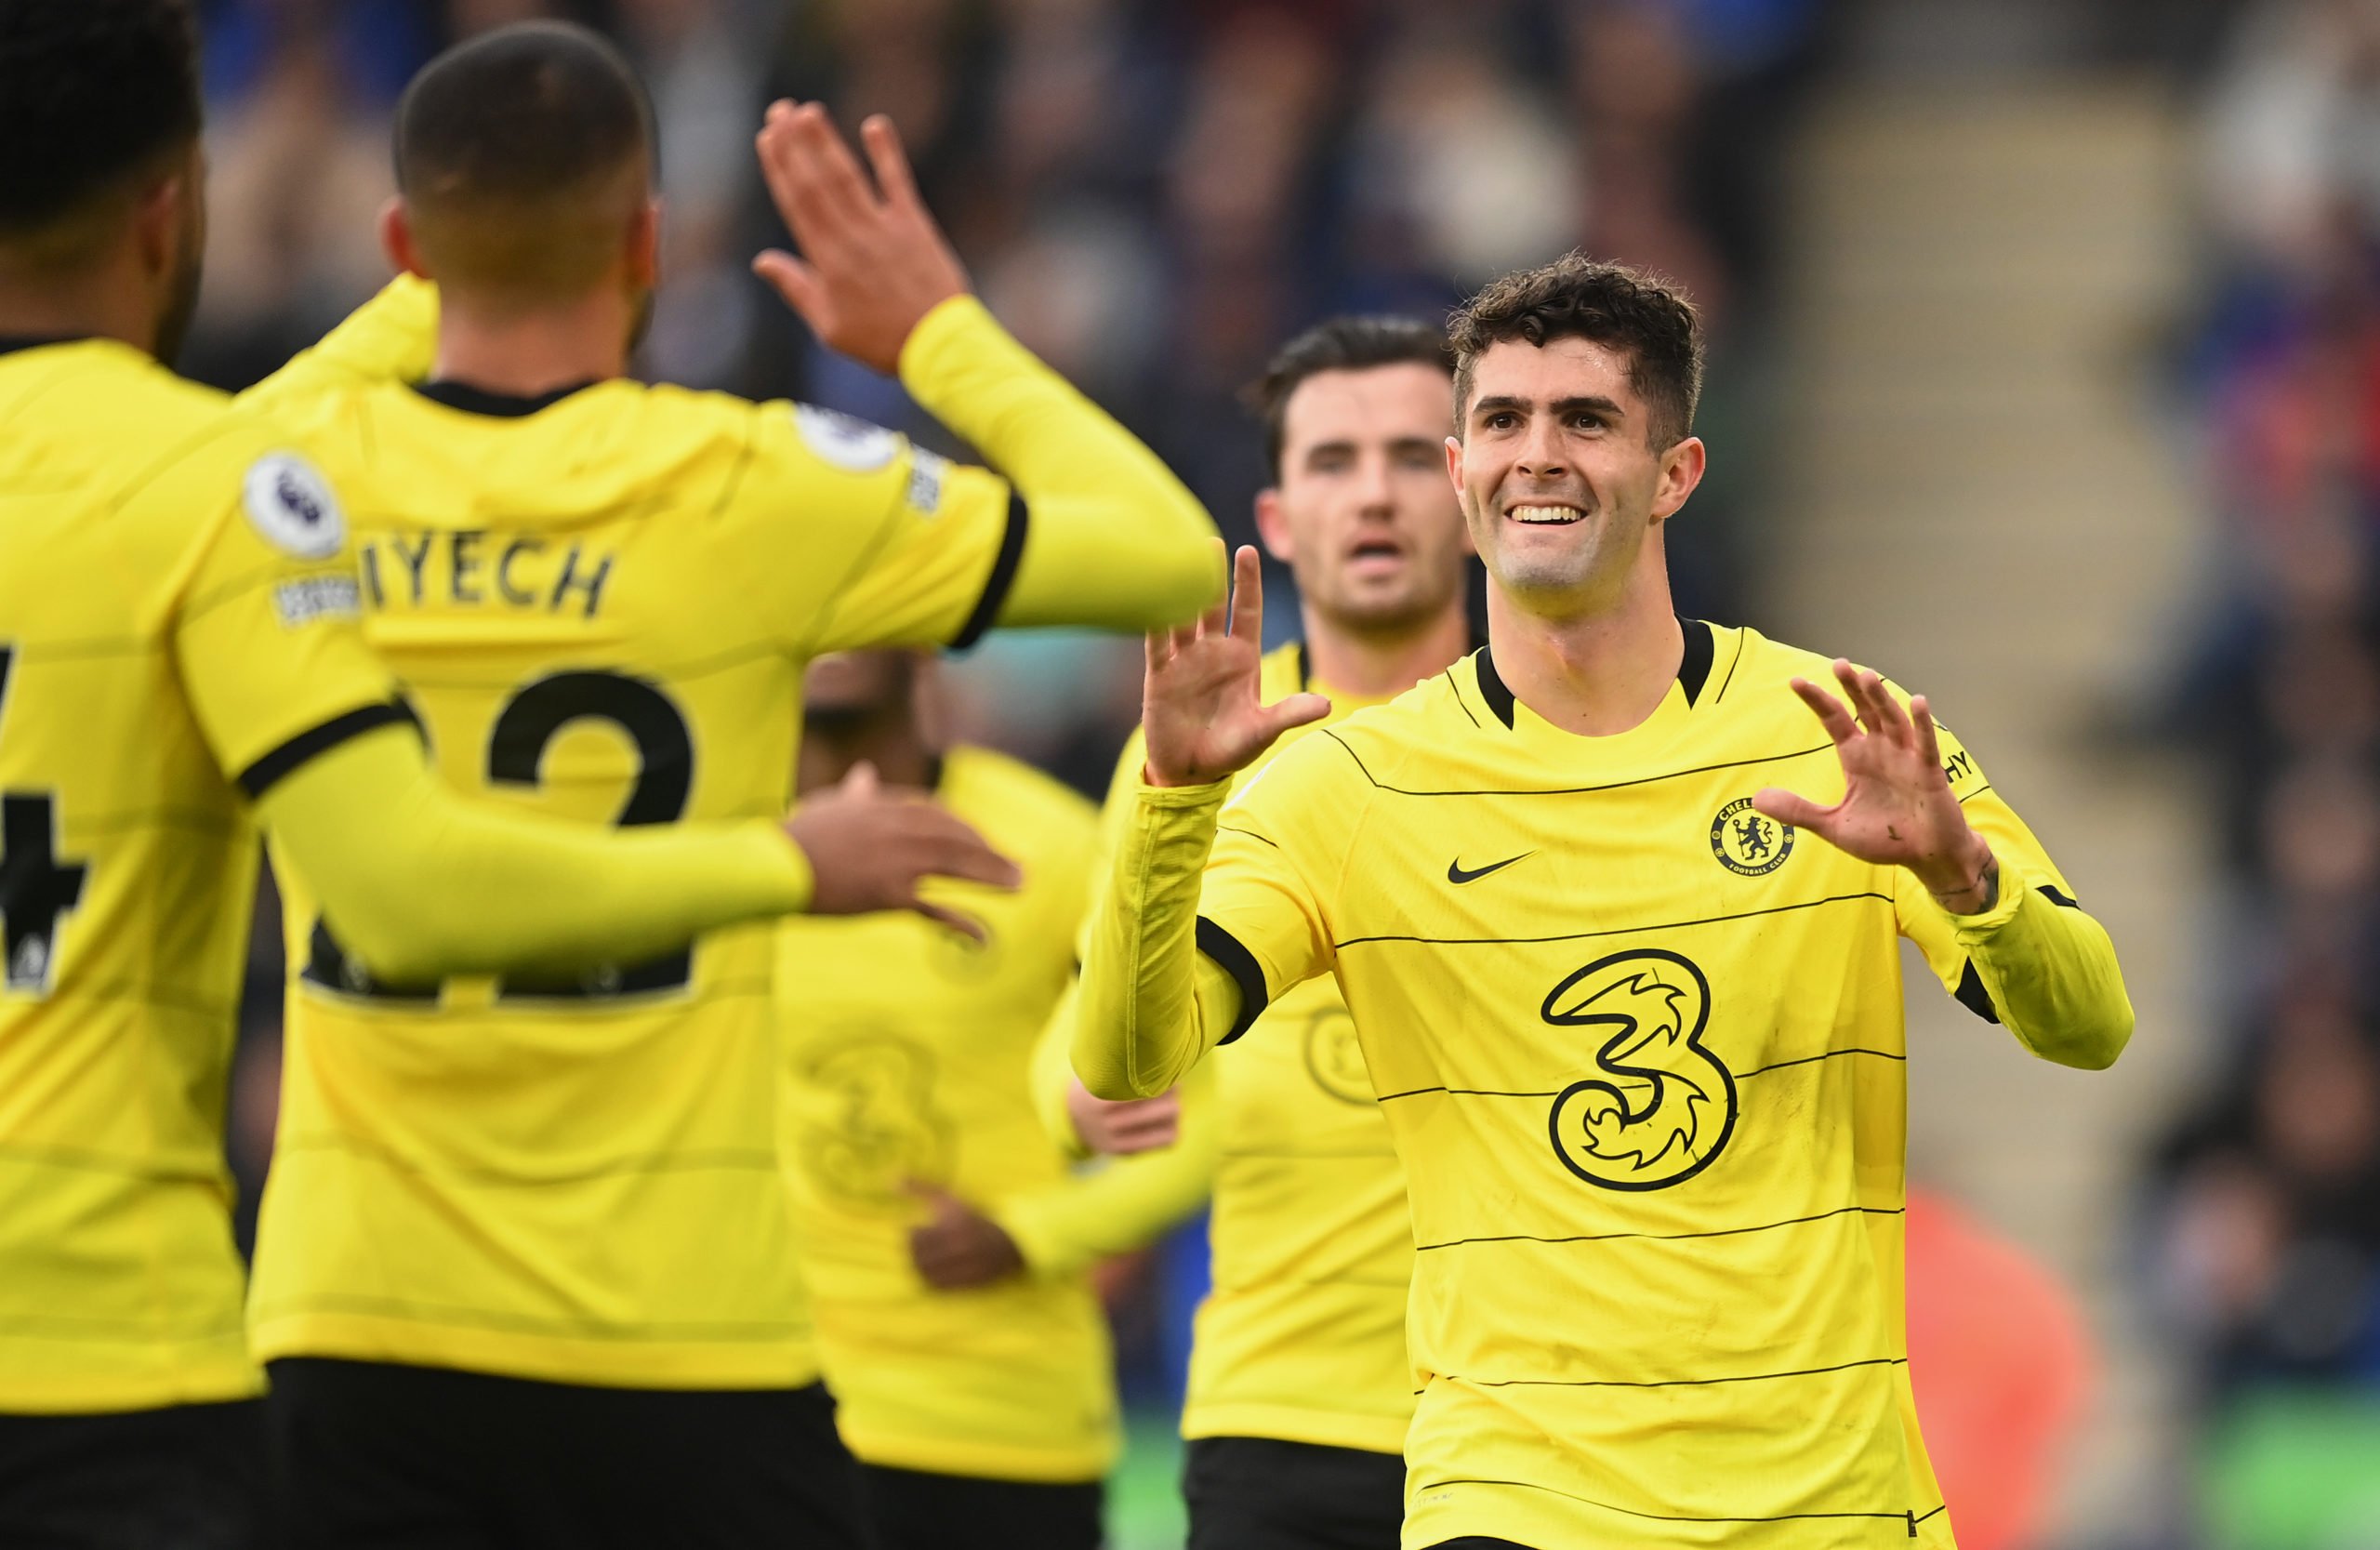 LEICESTER, ENGLAND - NOVEMBER 20: Christian Pulisic of Chelsea celebrates with teammates after scoring their team's third goal during the Premier League match between Leicester City and Chelsea at The King Power Stadium on November 20, 2021 in Leicester, England. (Photo by Michael Regan/Getty Images)The 4th Official uses images provided by the following image agency:
Getty Images (https://www.gettyimages.de/)
Imago Images (https://www.imago-images.de/)